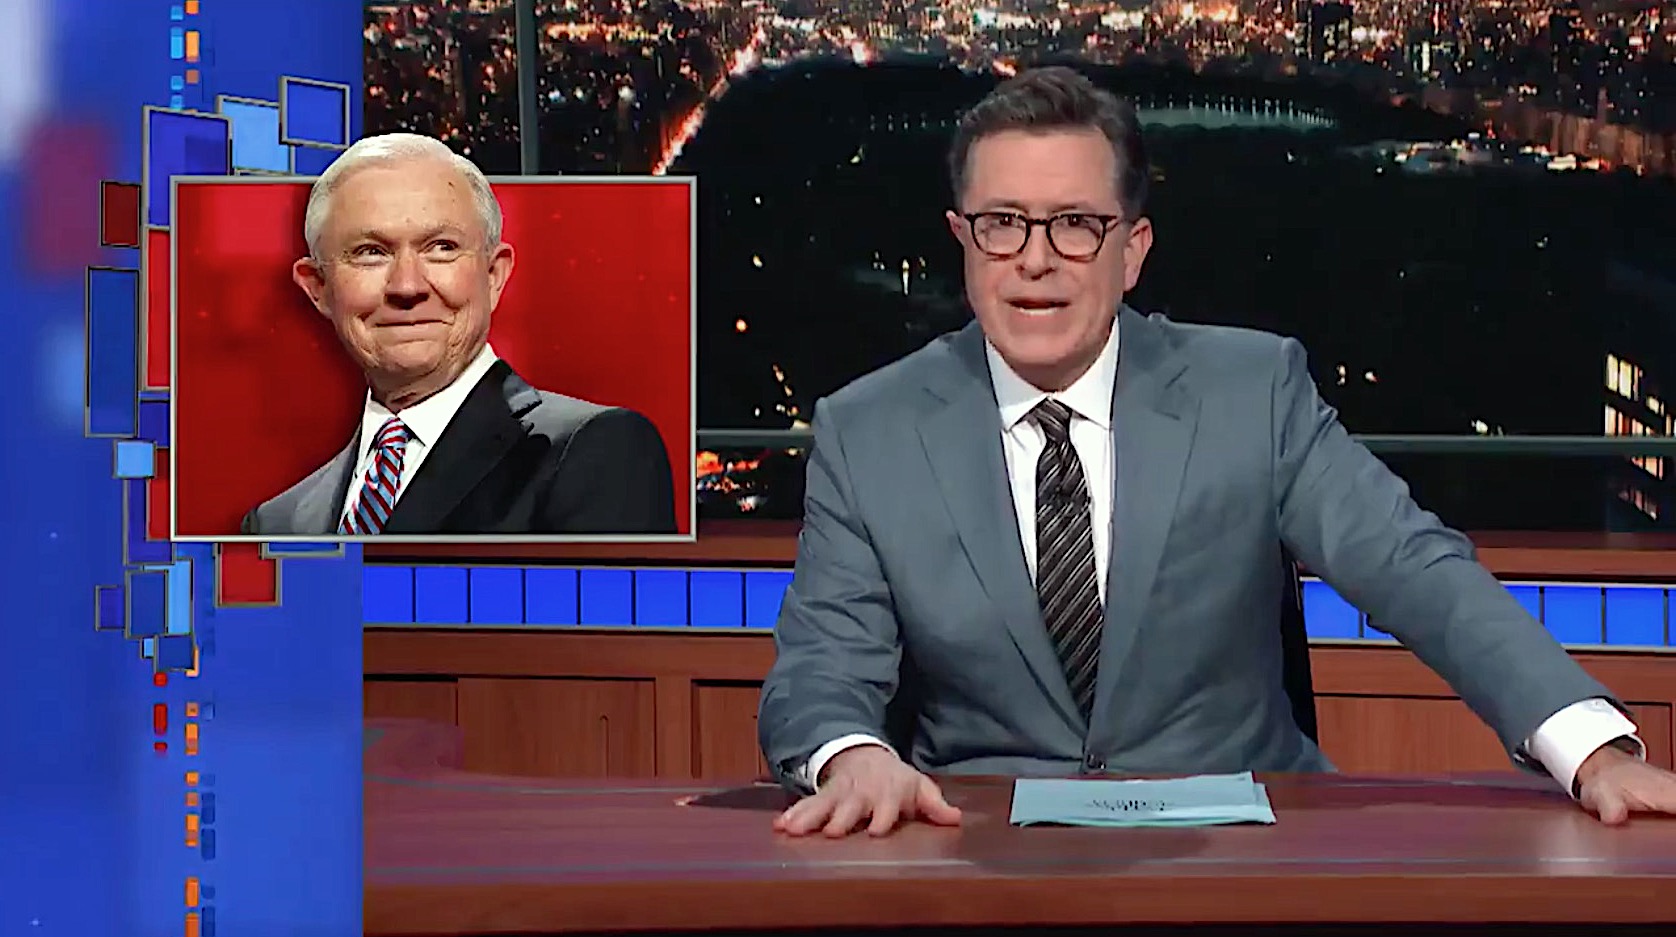 Stephen Colbert rips Jeff Sessions